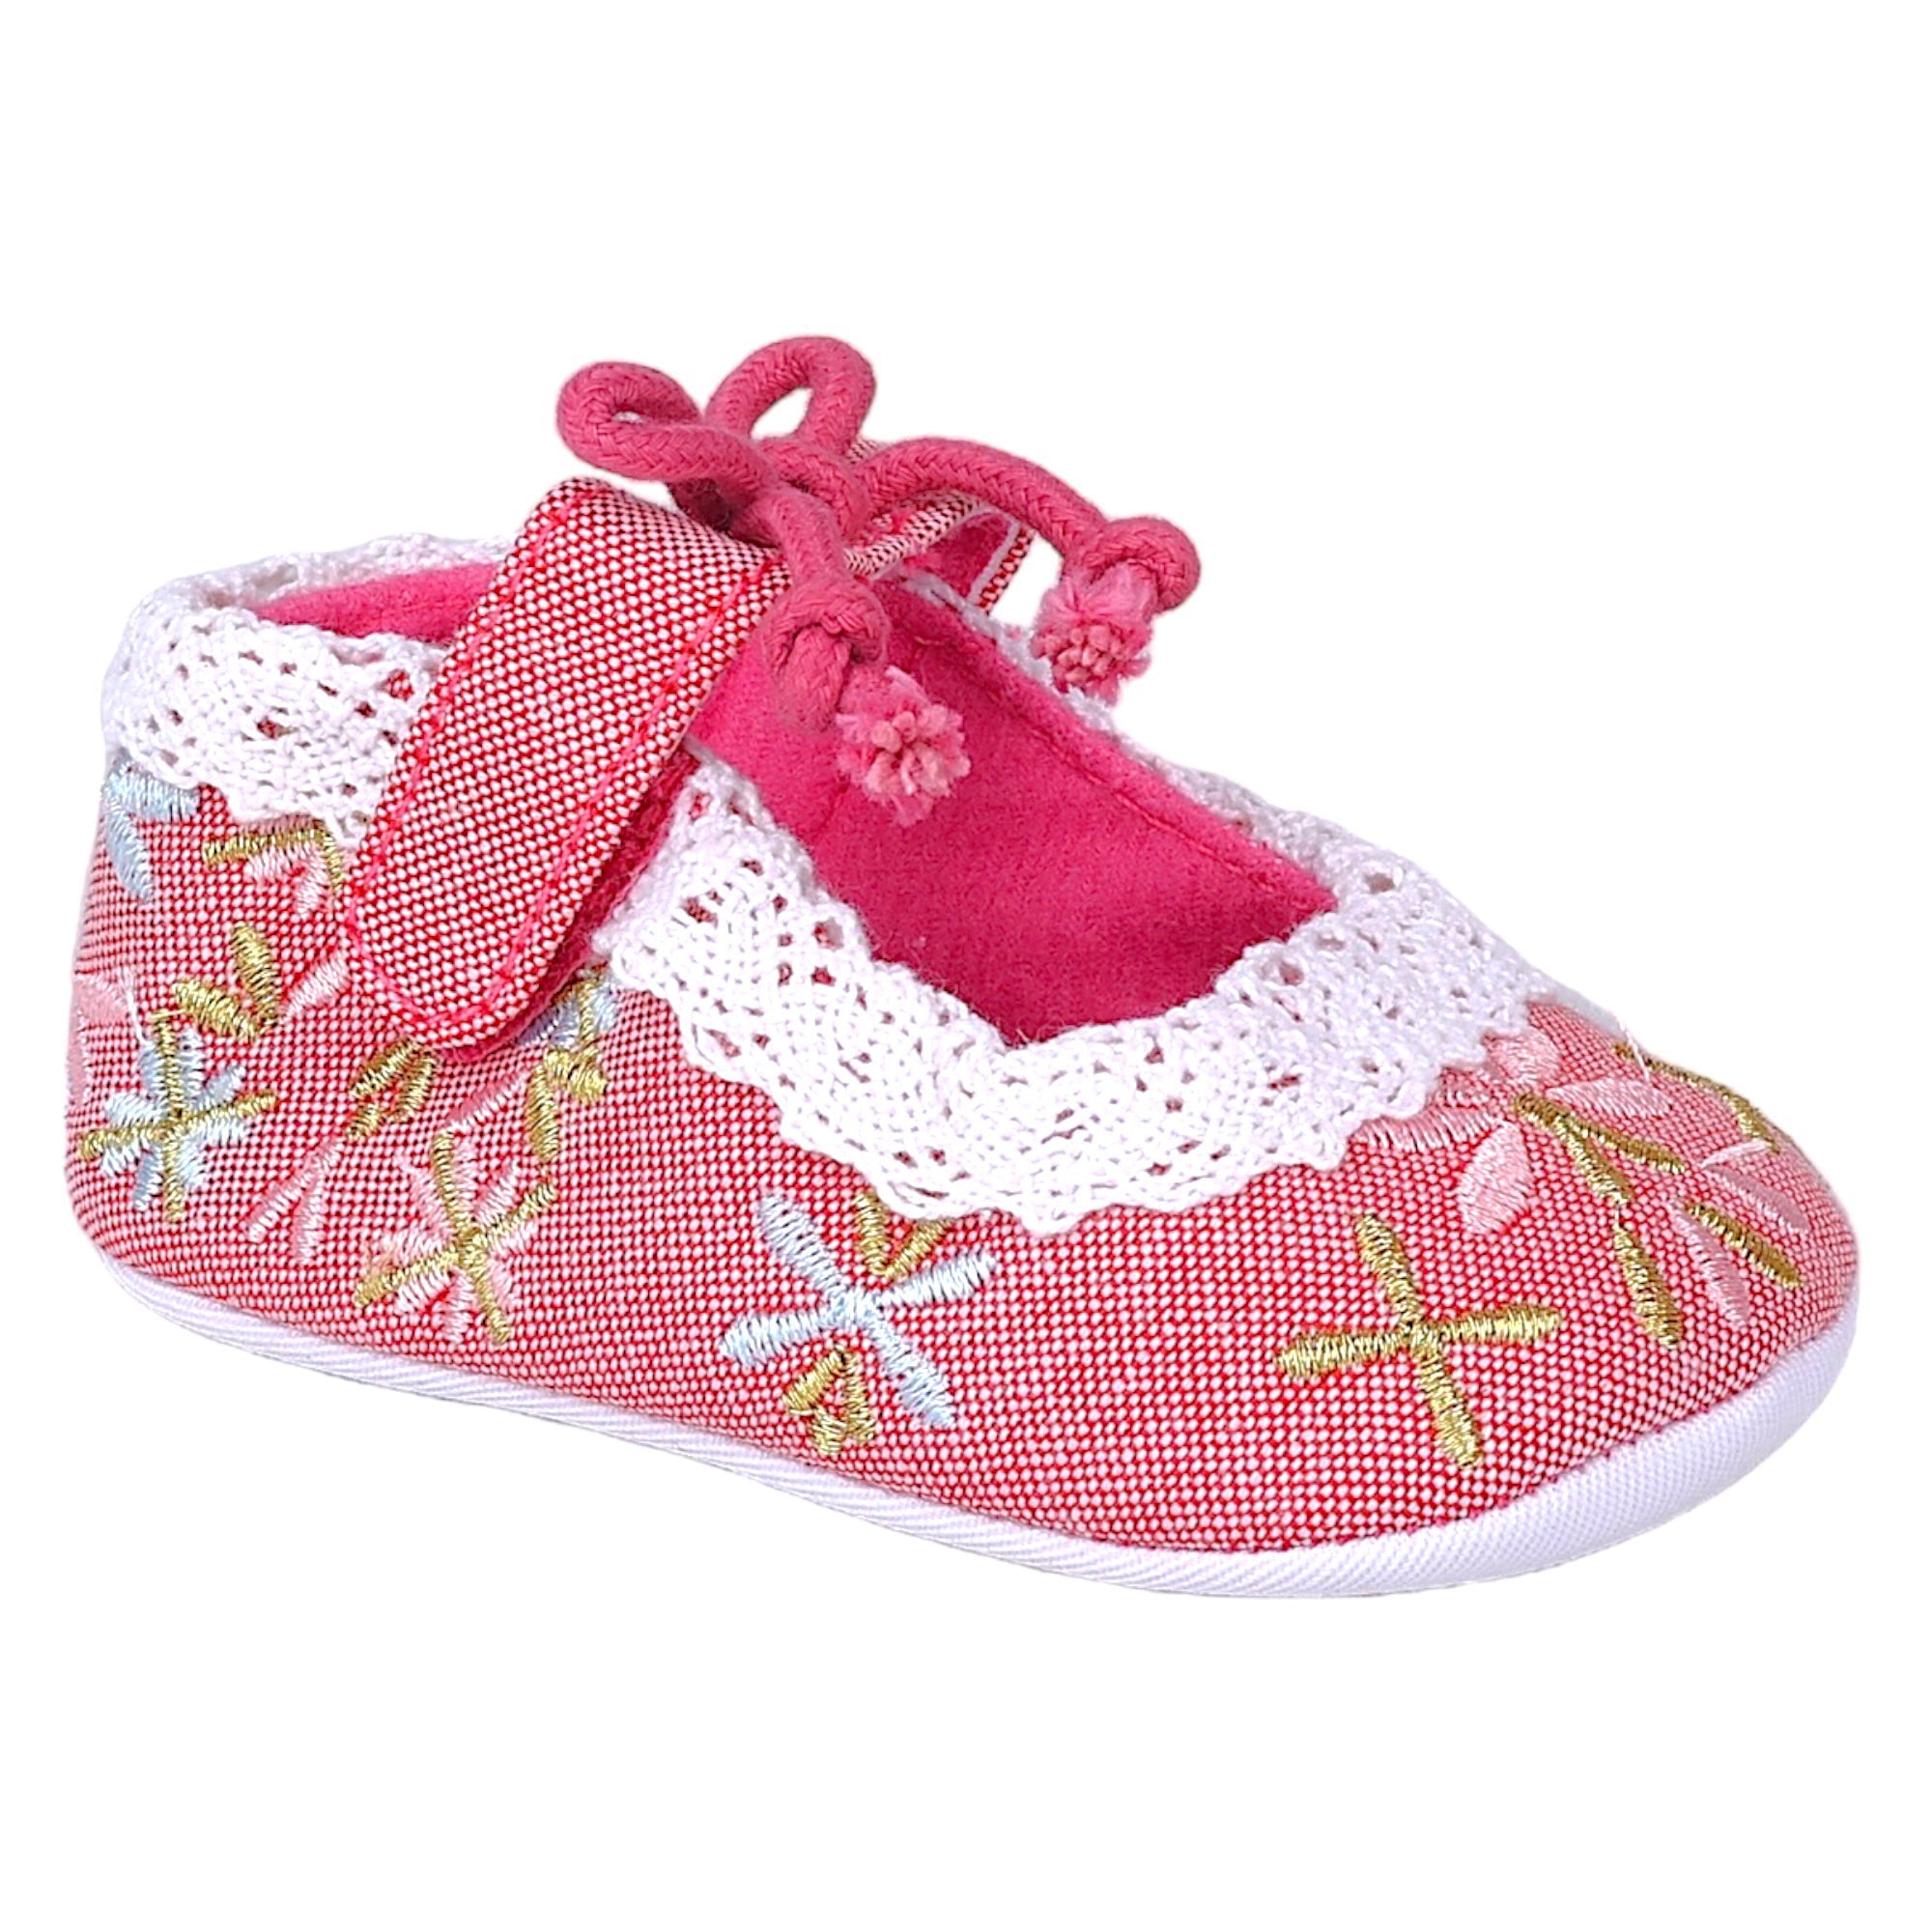 Baby Moo Fancy Floral Embroidered Velcro Straps Anti-Skid Booties - Peach